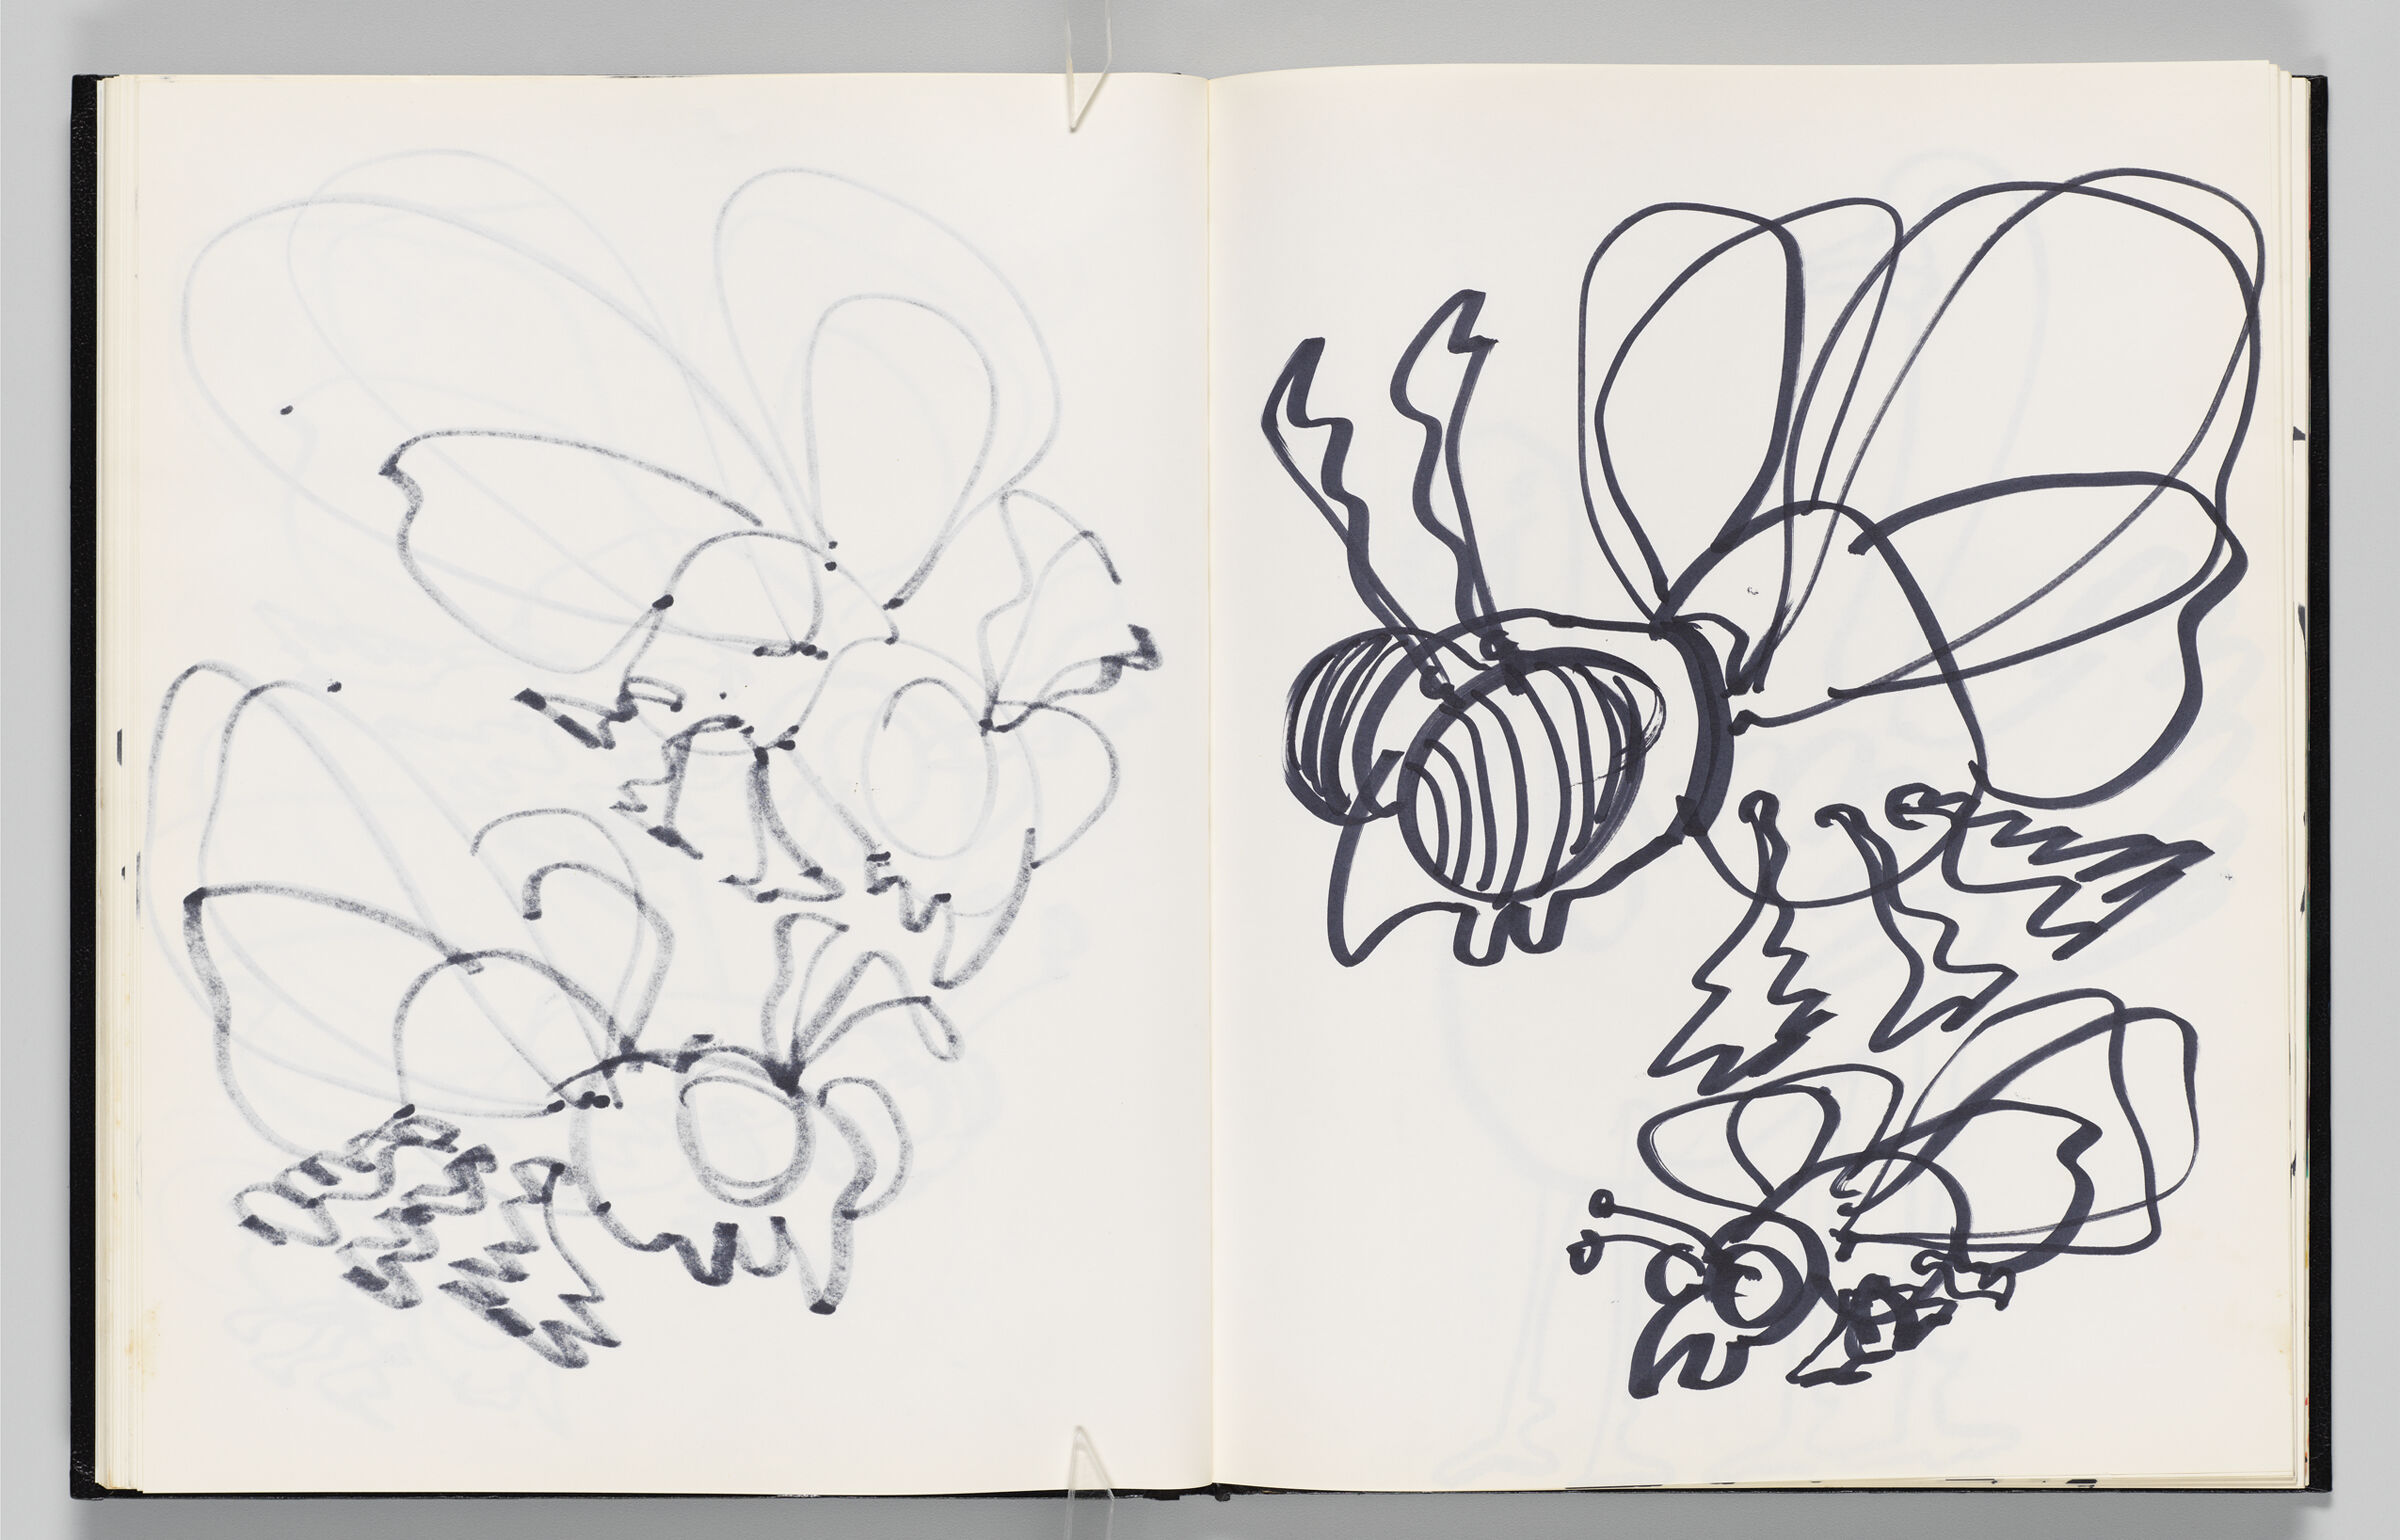 Untitled (Bleed-Through Of Previous Page, Left Page); Untitled (Gnats, Right Page)